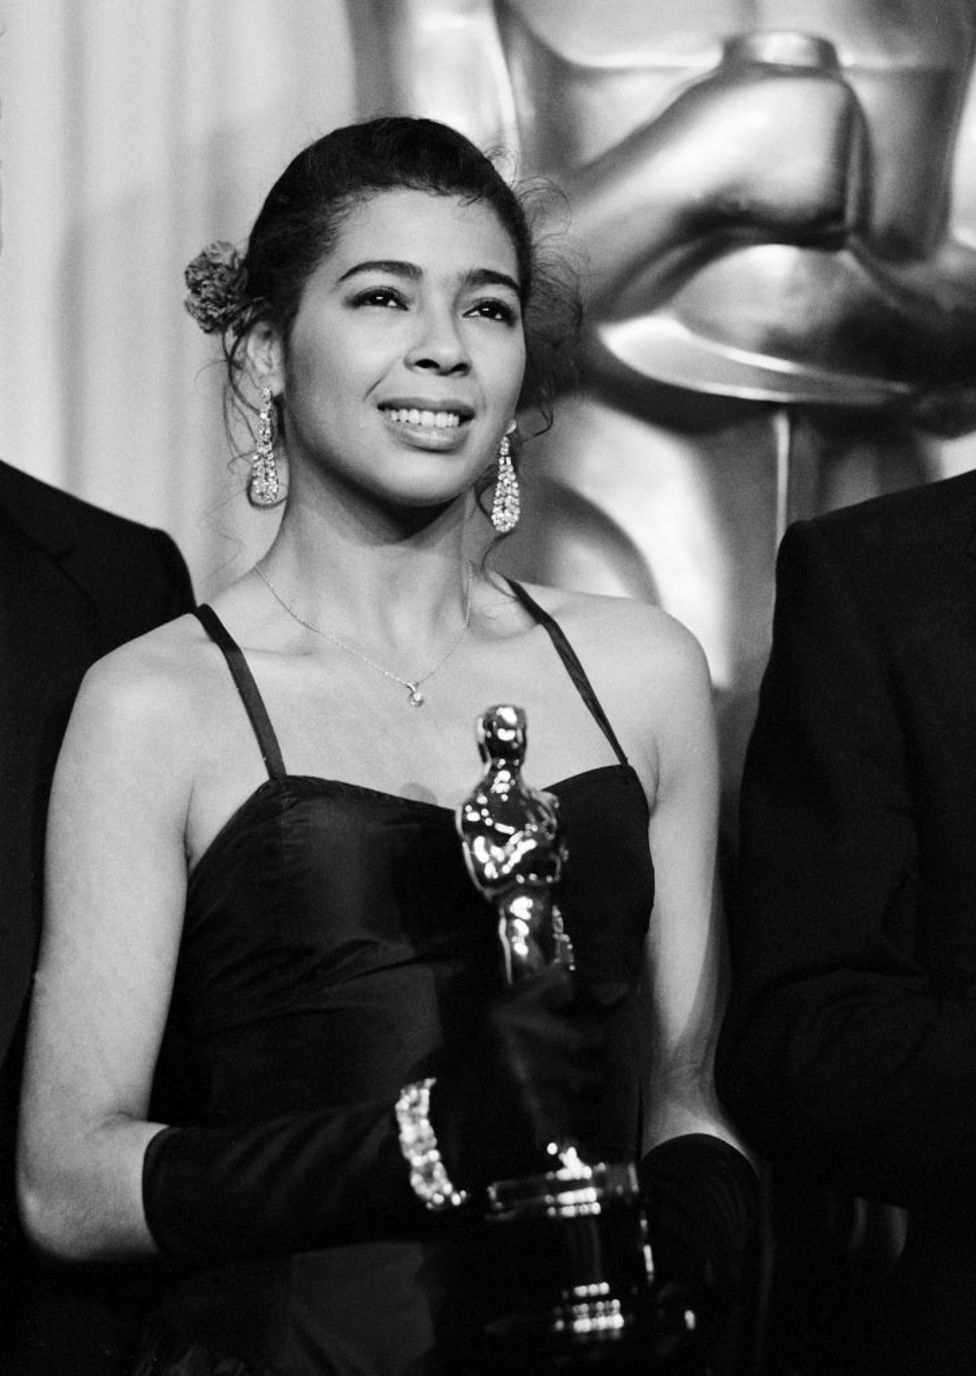 'Irene Cara' American Singer and Actress Dies at Aged 63